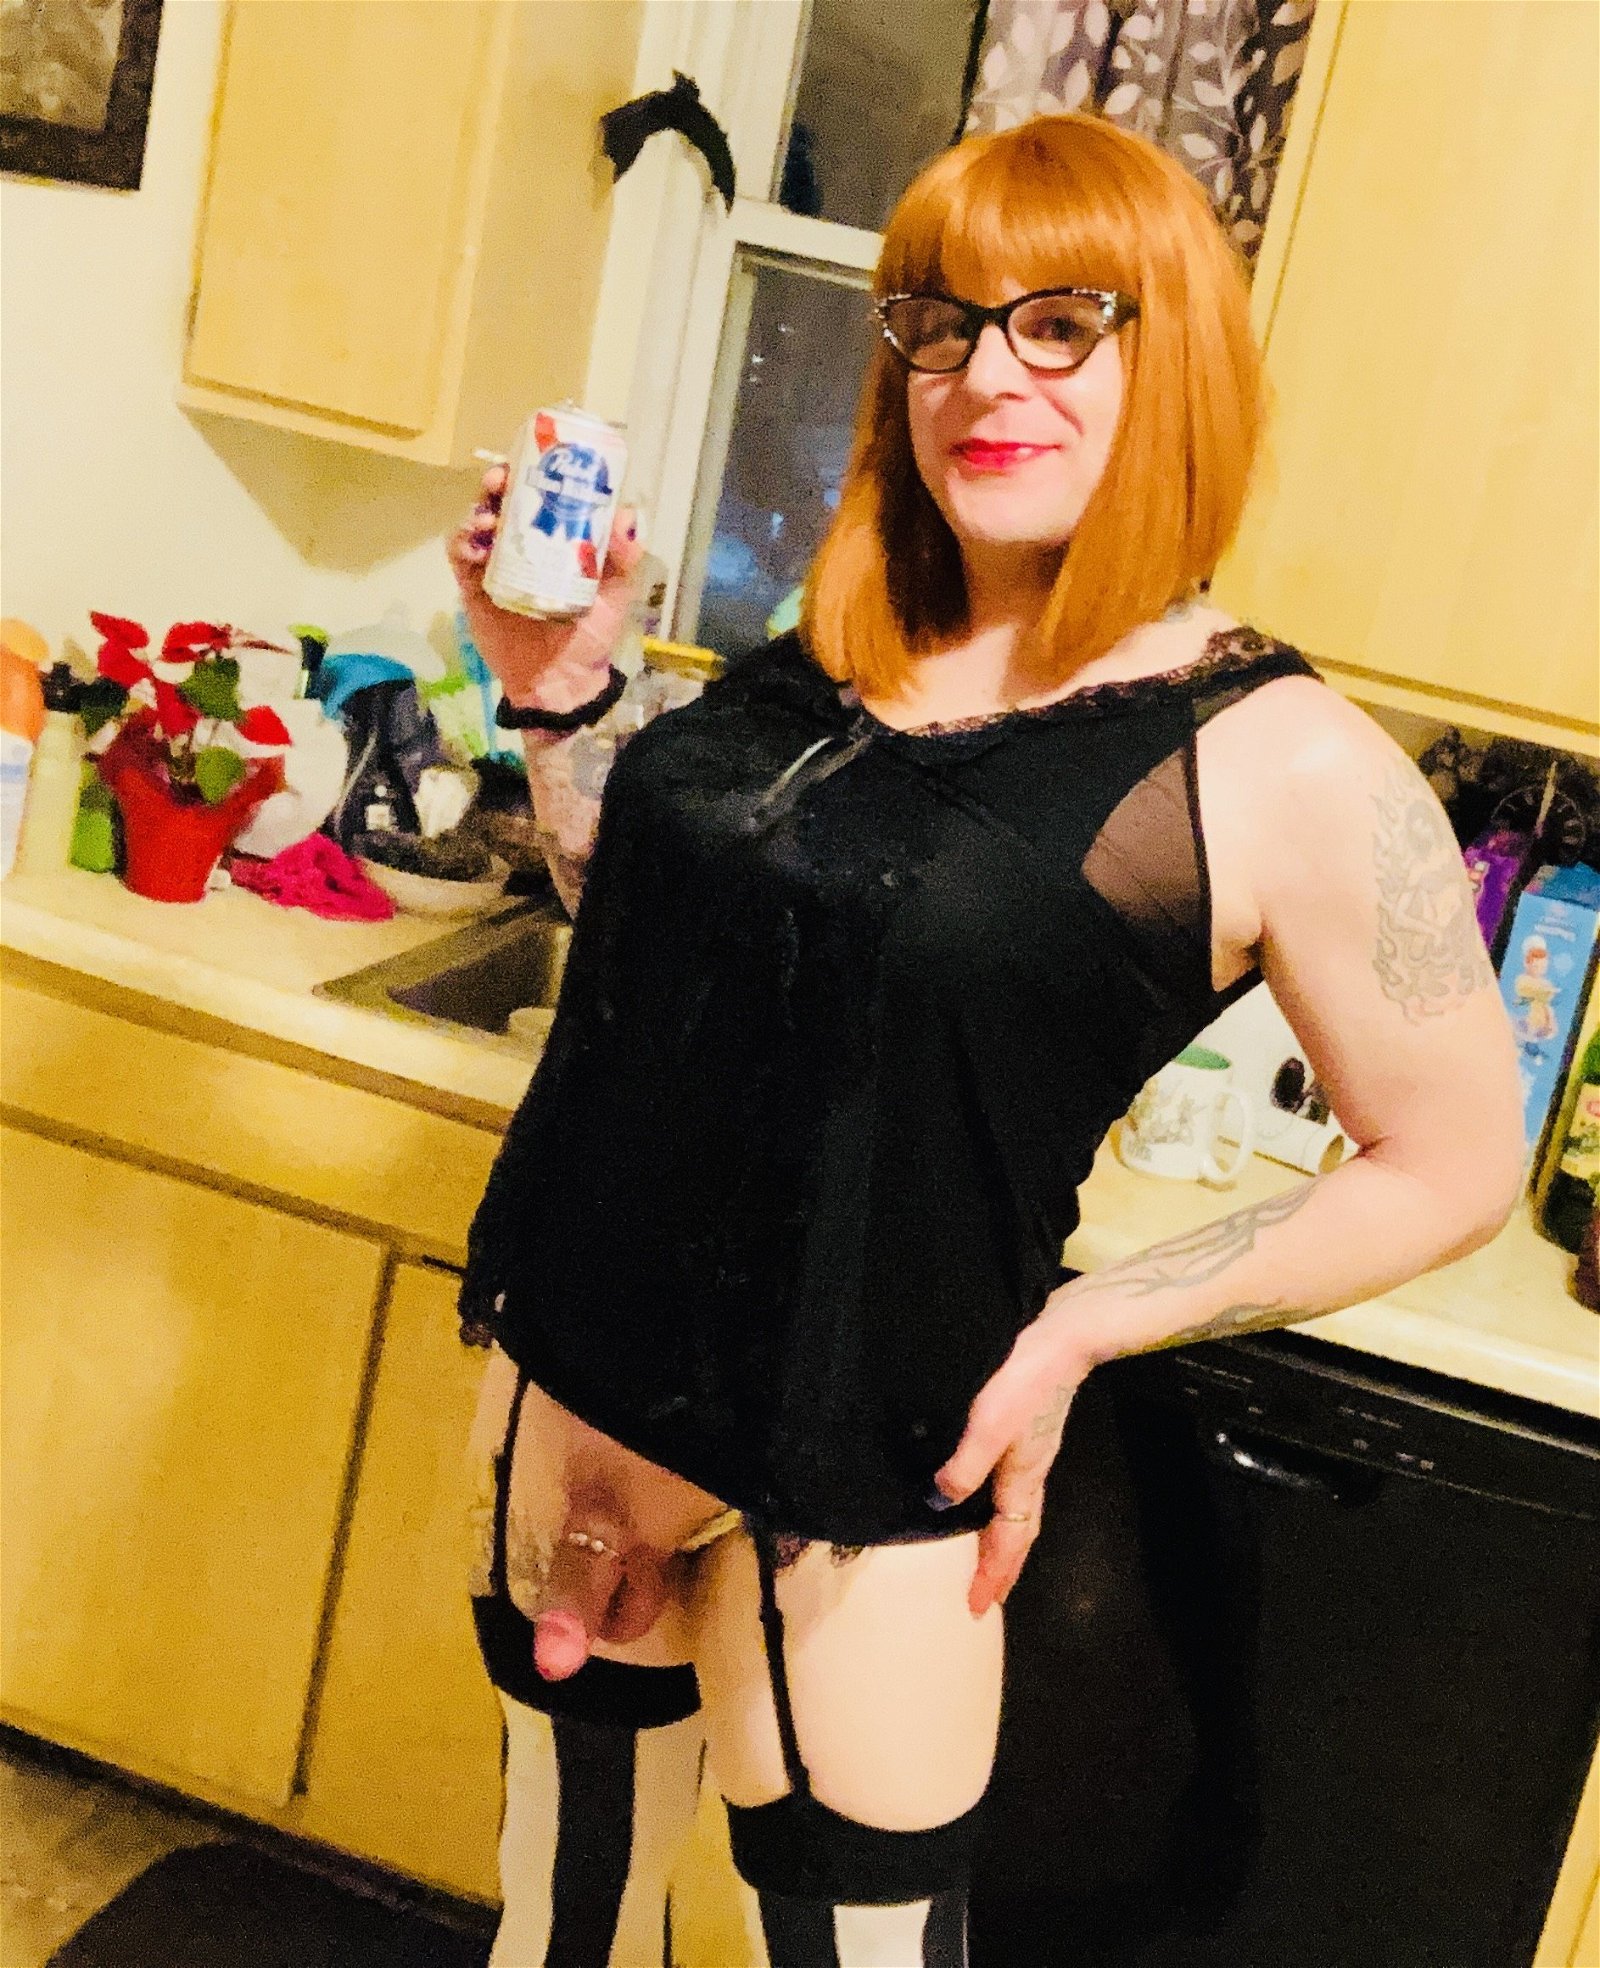 Photo by DangerMarcy with the username @DangerMarcy, who is a verified user,  July 2, 2022 at 7:29 PM. The post is about the topic Sexy Shemale and the text says 'Tipsy and Horny😘
Who wants to “take advantage?”
#transgender #tgirl #transwoman #daydrinking #girlycock #bisexual #gay #lgbtq'